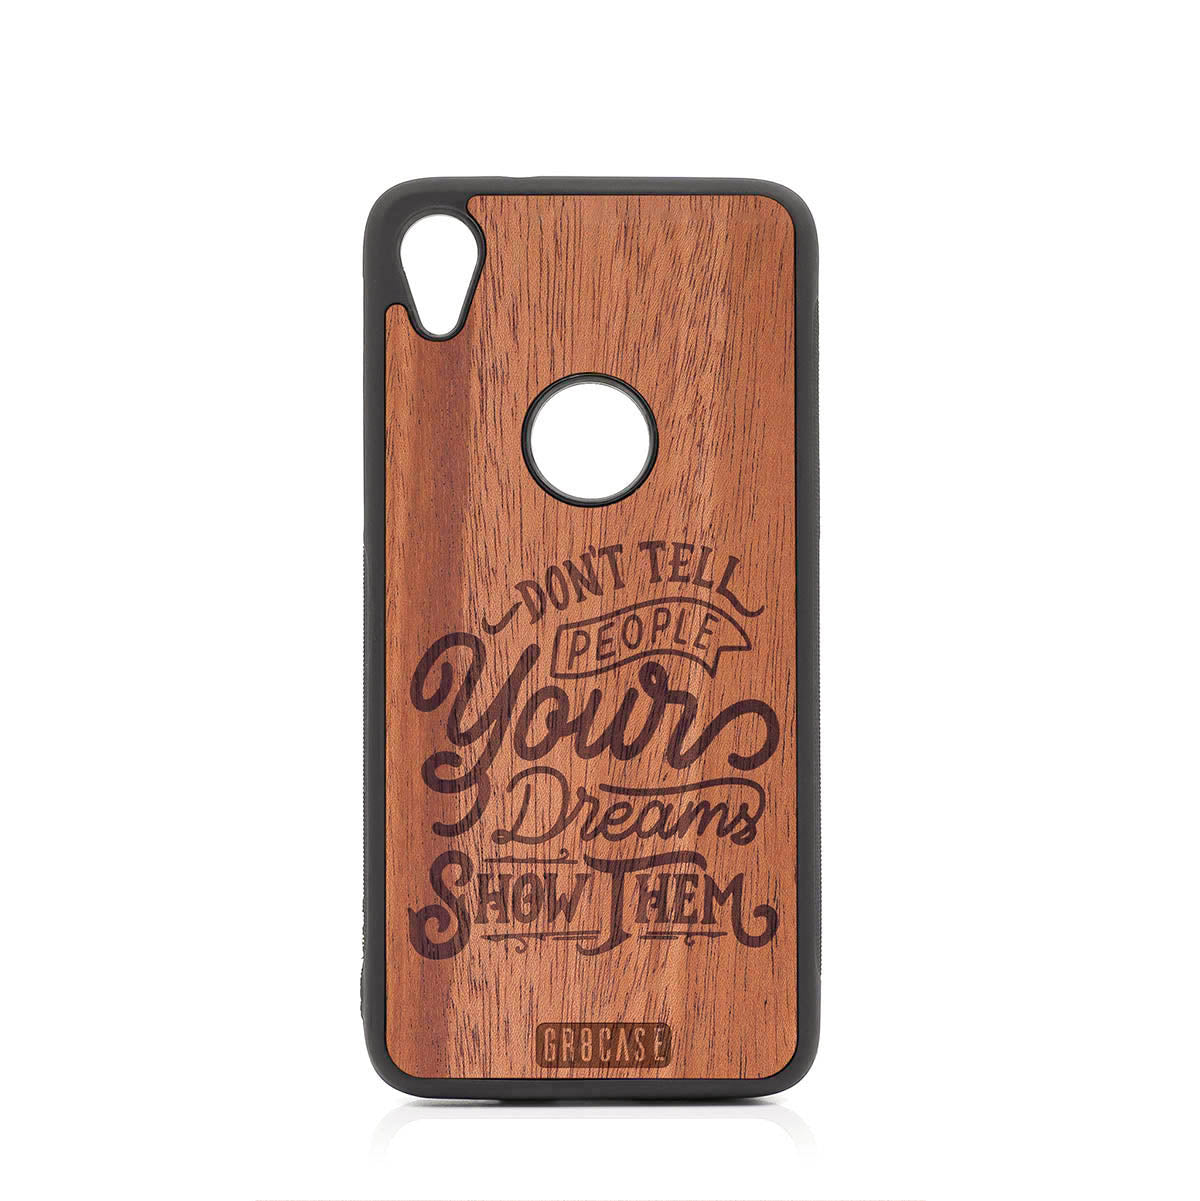 Don't Tell People Your Dreams Show Them Design Wood Case For Moto E6 by GR8CASE